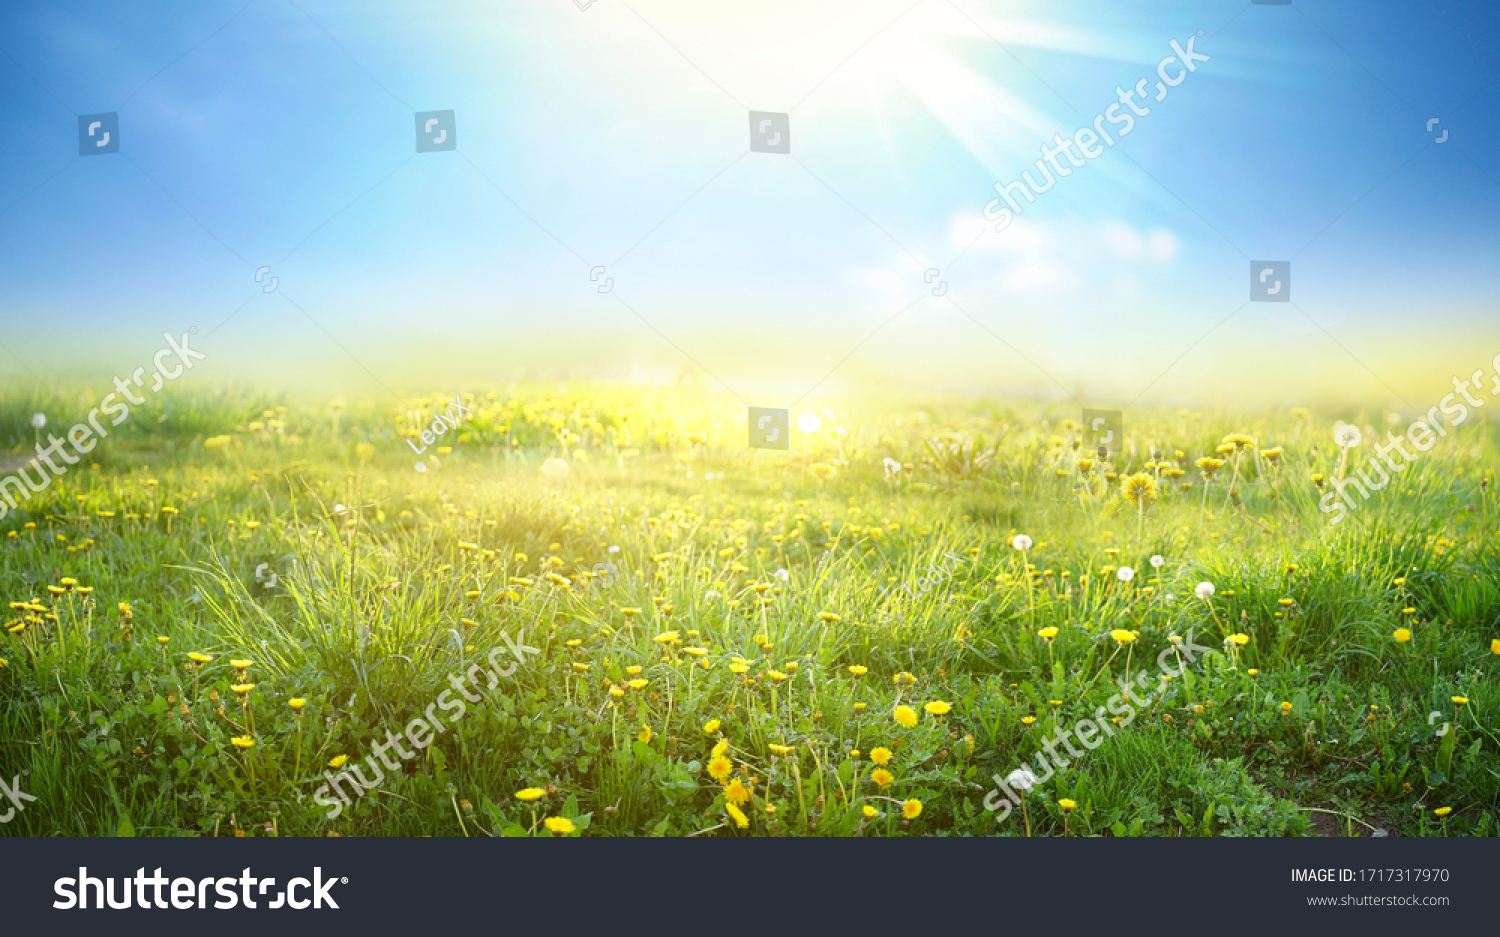 Beautiful meadow field with fresh grass and yellow dandelion flowers in nature against a blurry blue sky with clouds. Summer spring natural landscape. #1717317970